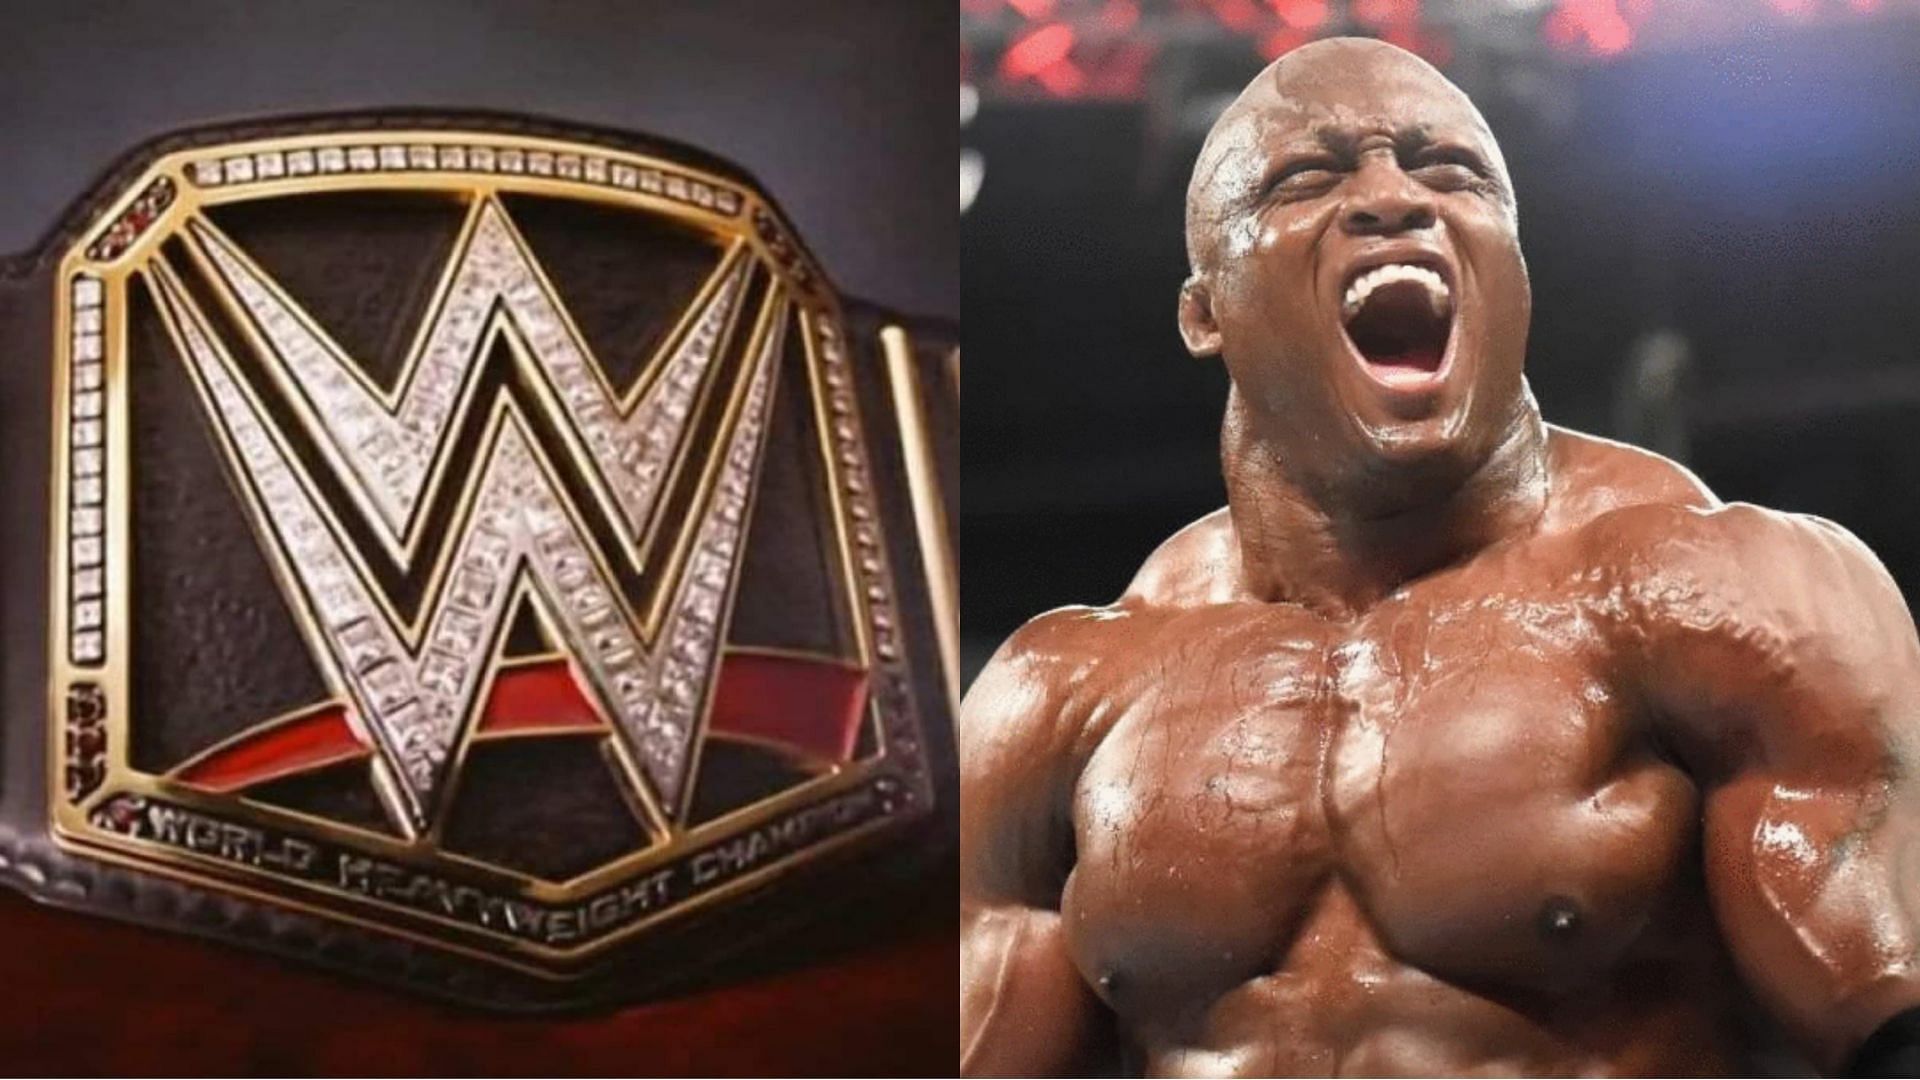 Lashley is a two-time WWE Champion.